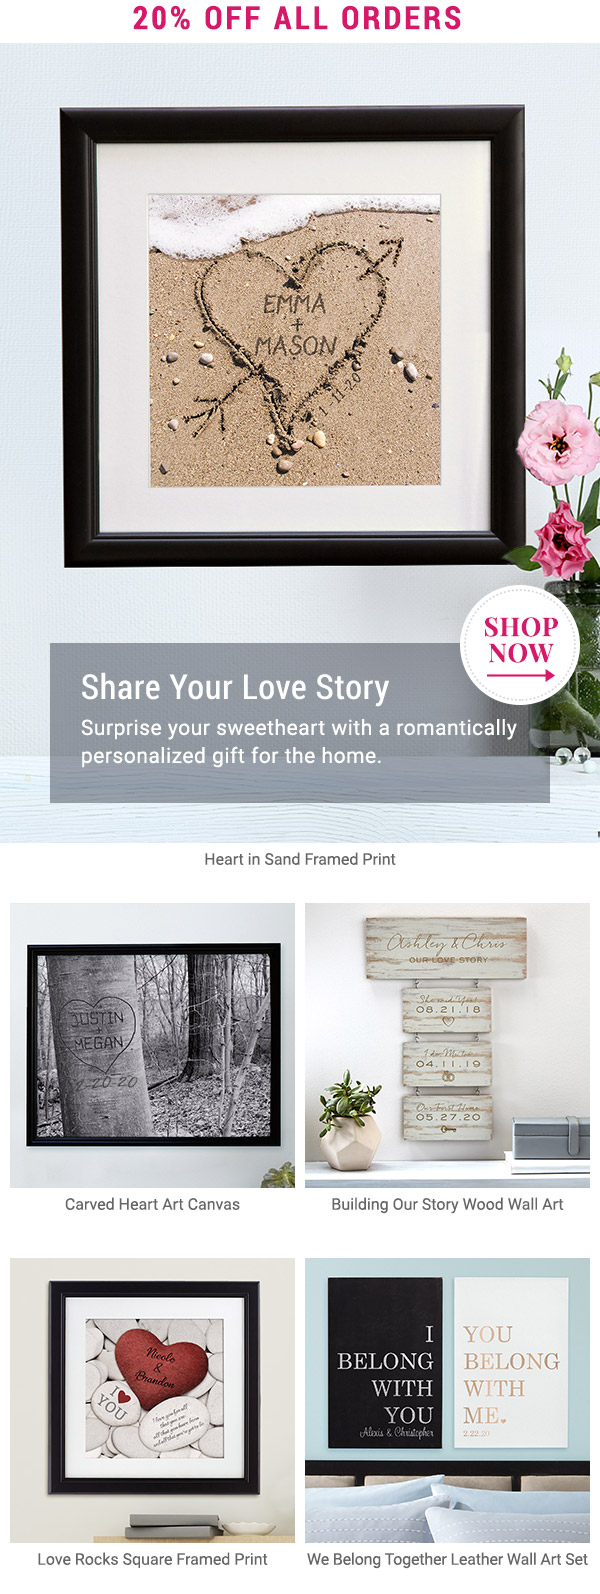 20% off all orders. Share Your Love Story.